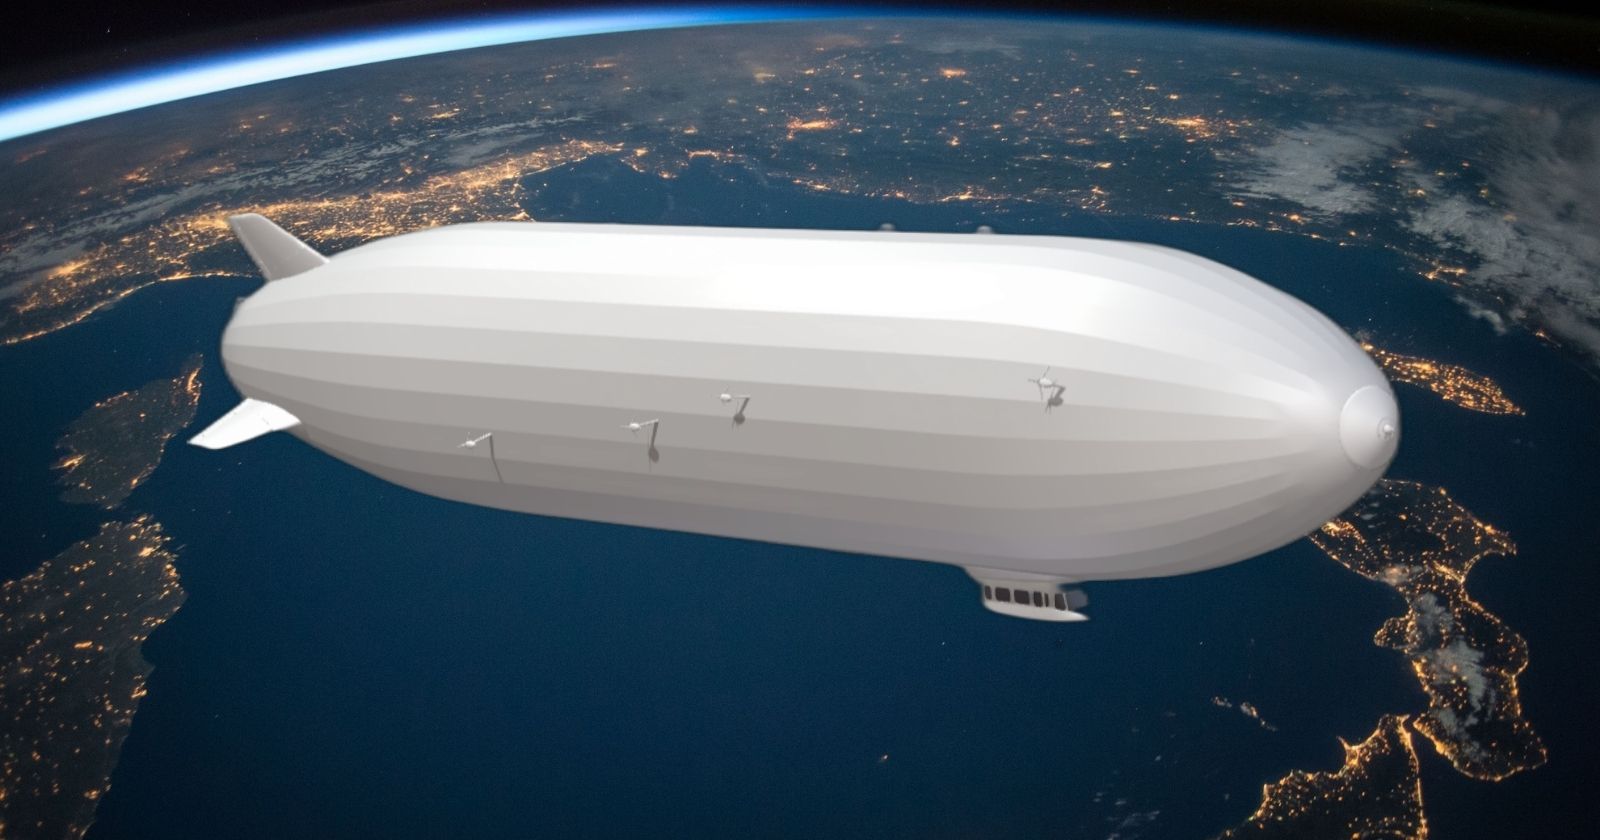 Pathfinder 1 airship, which can be considered an electric plane, is on a test flight!